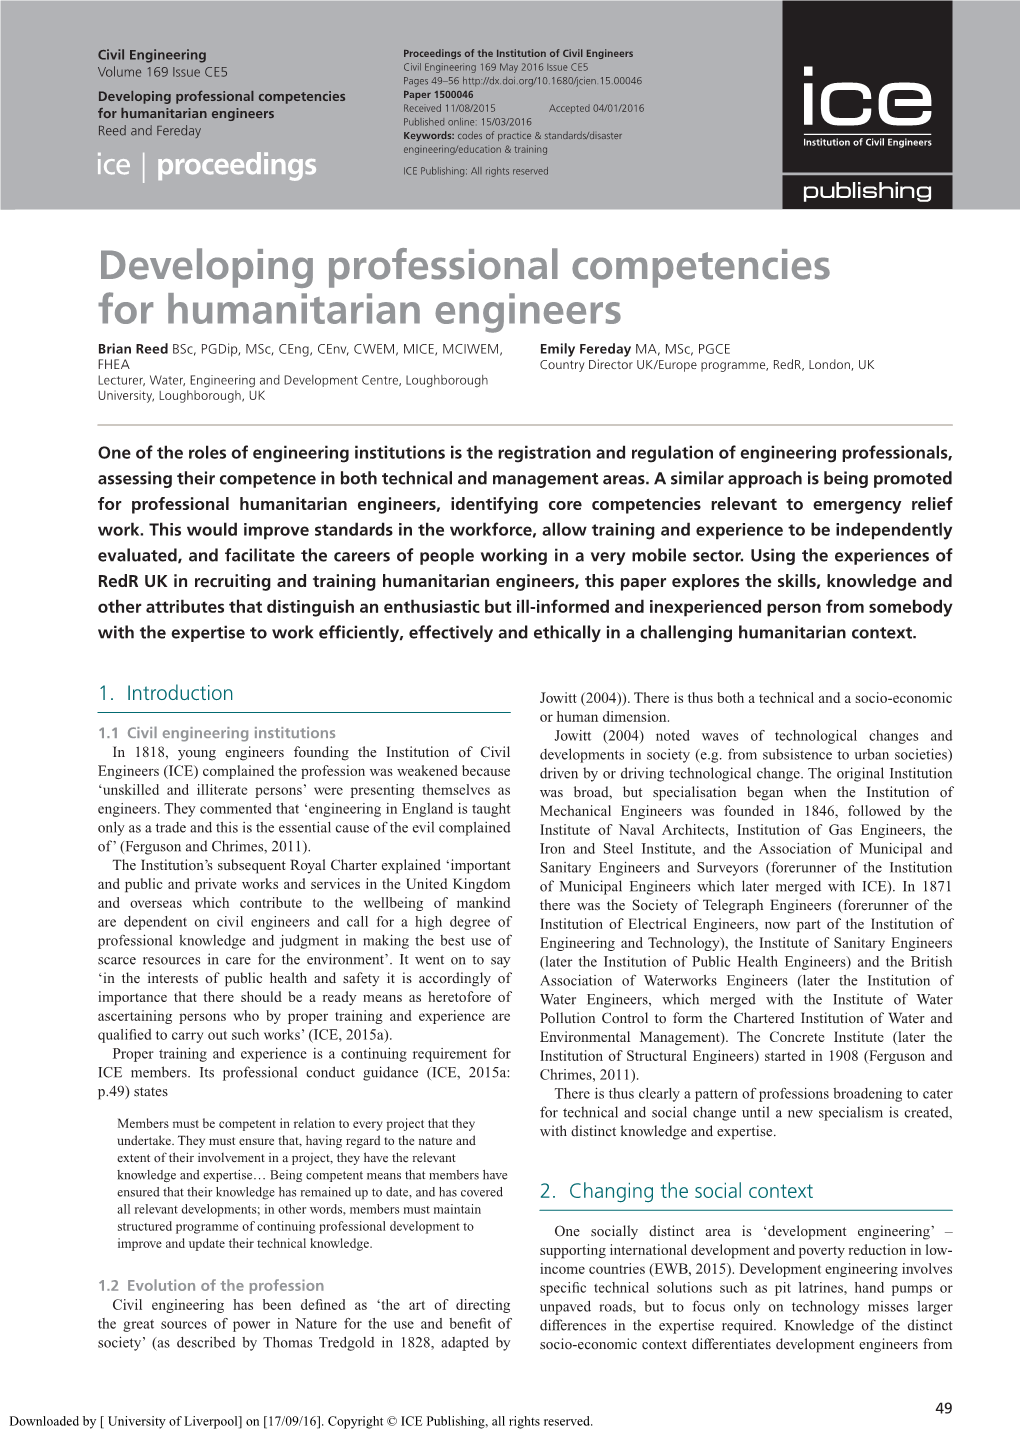 Developing Professional Competencies for Humanitarian